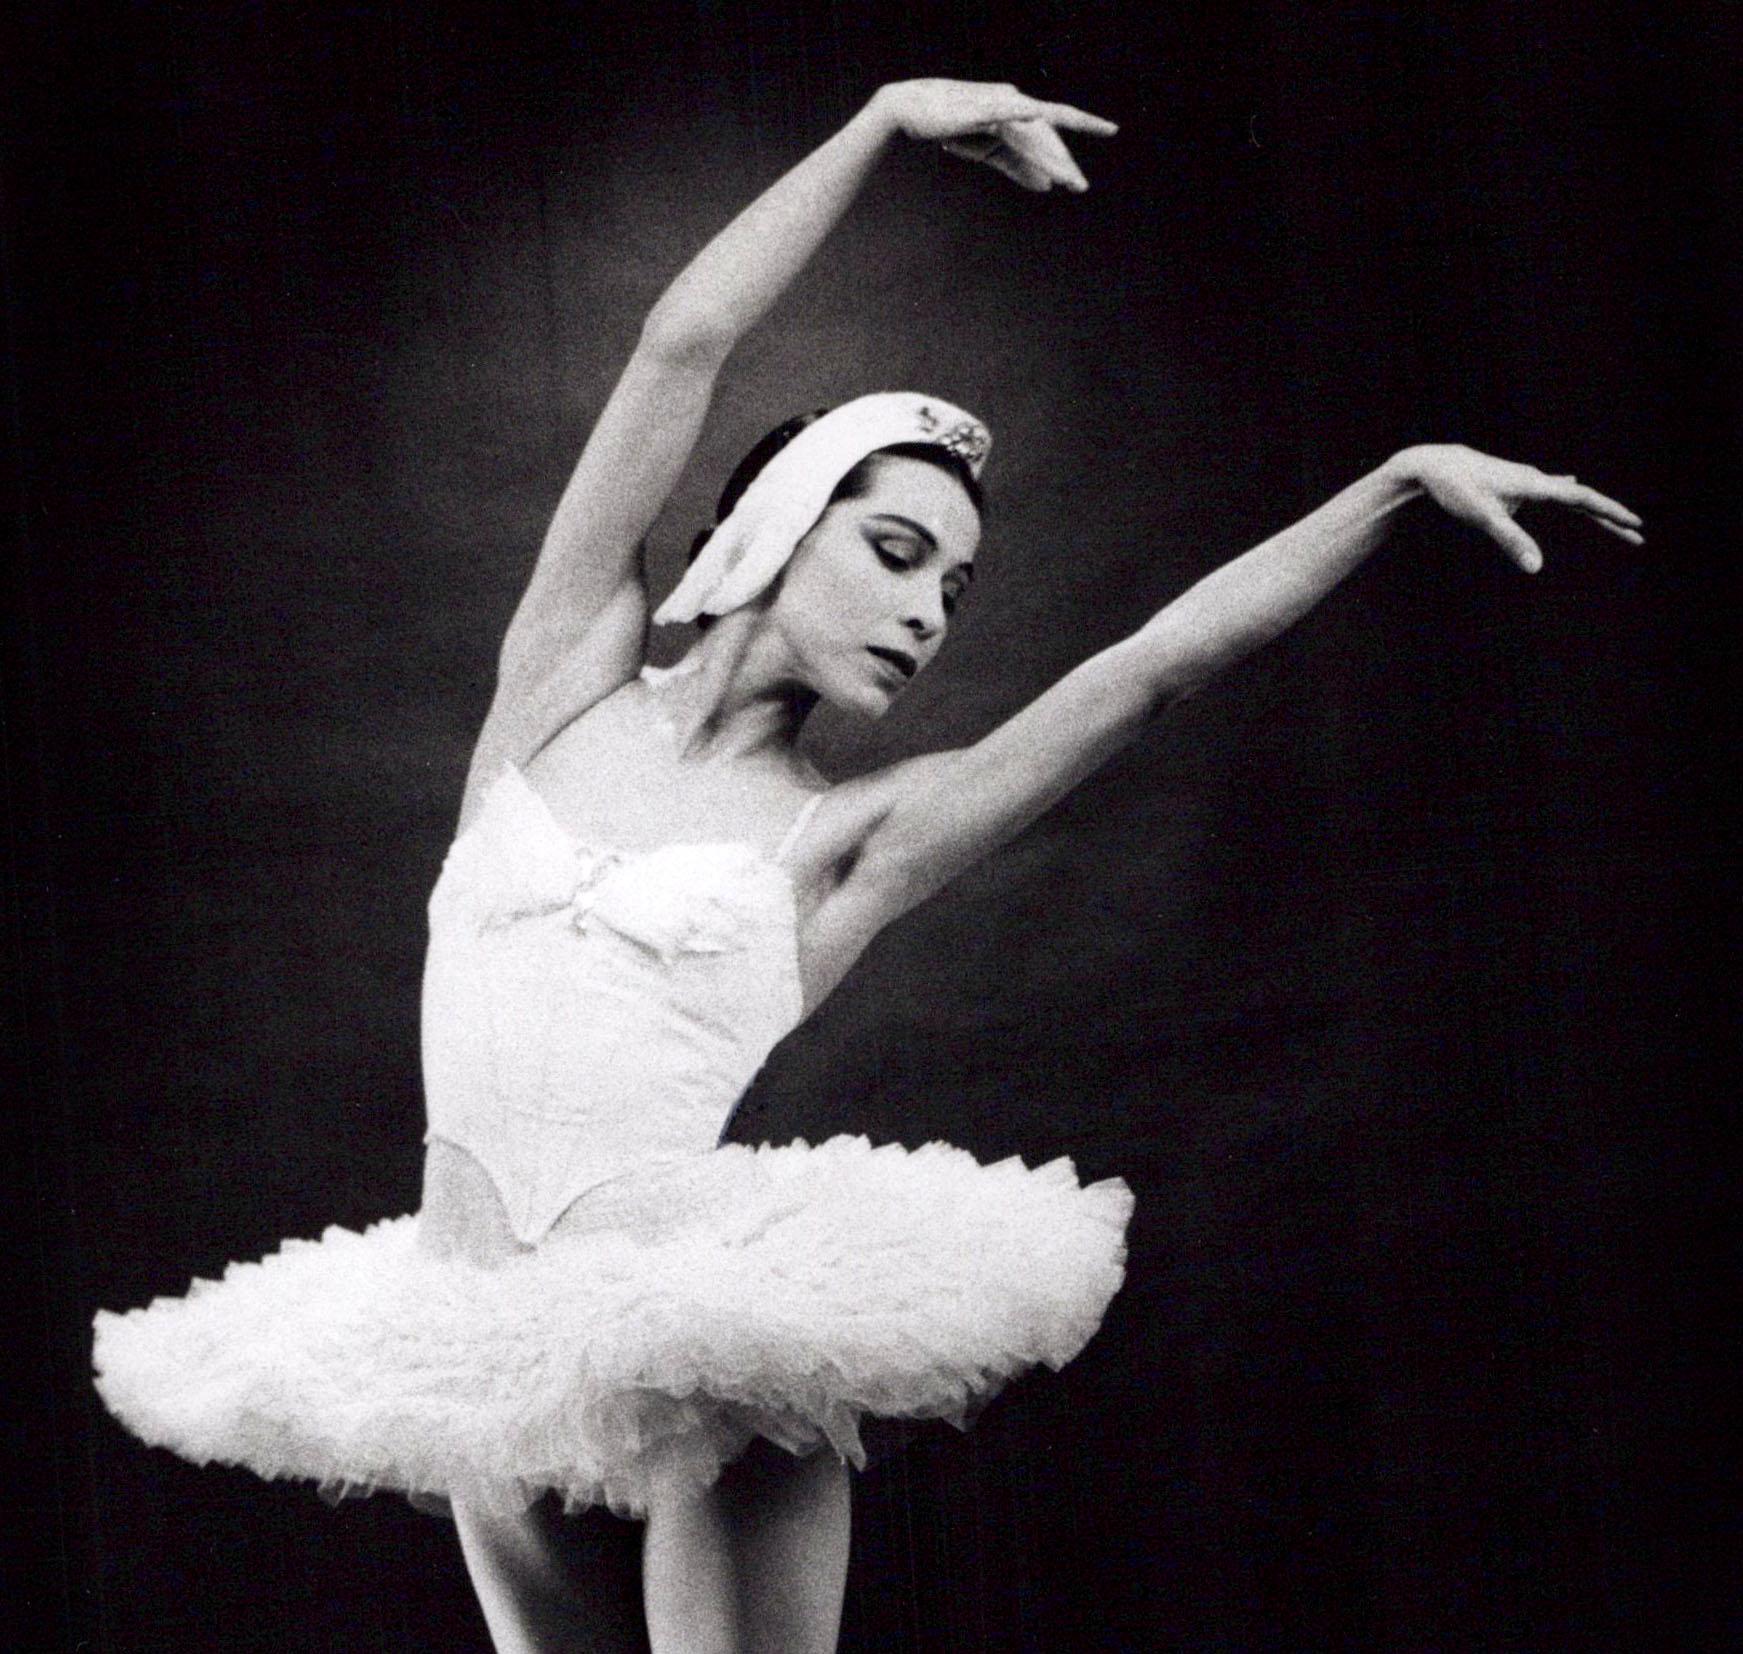 Famed Native American Ballerina Maria Tallchief performing 'Swan Lake' - Photograph by Jack Mitchell